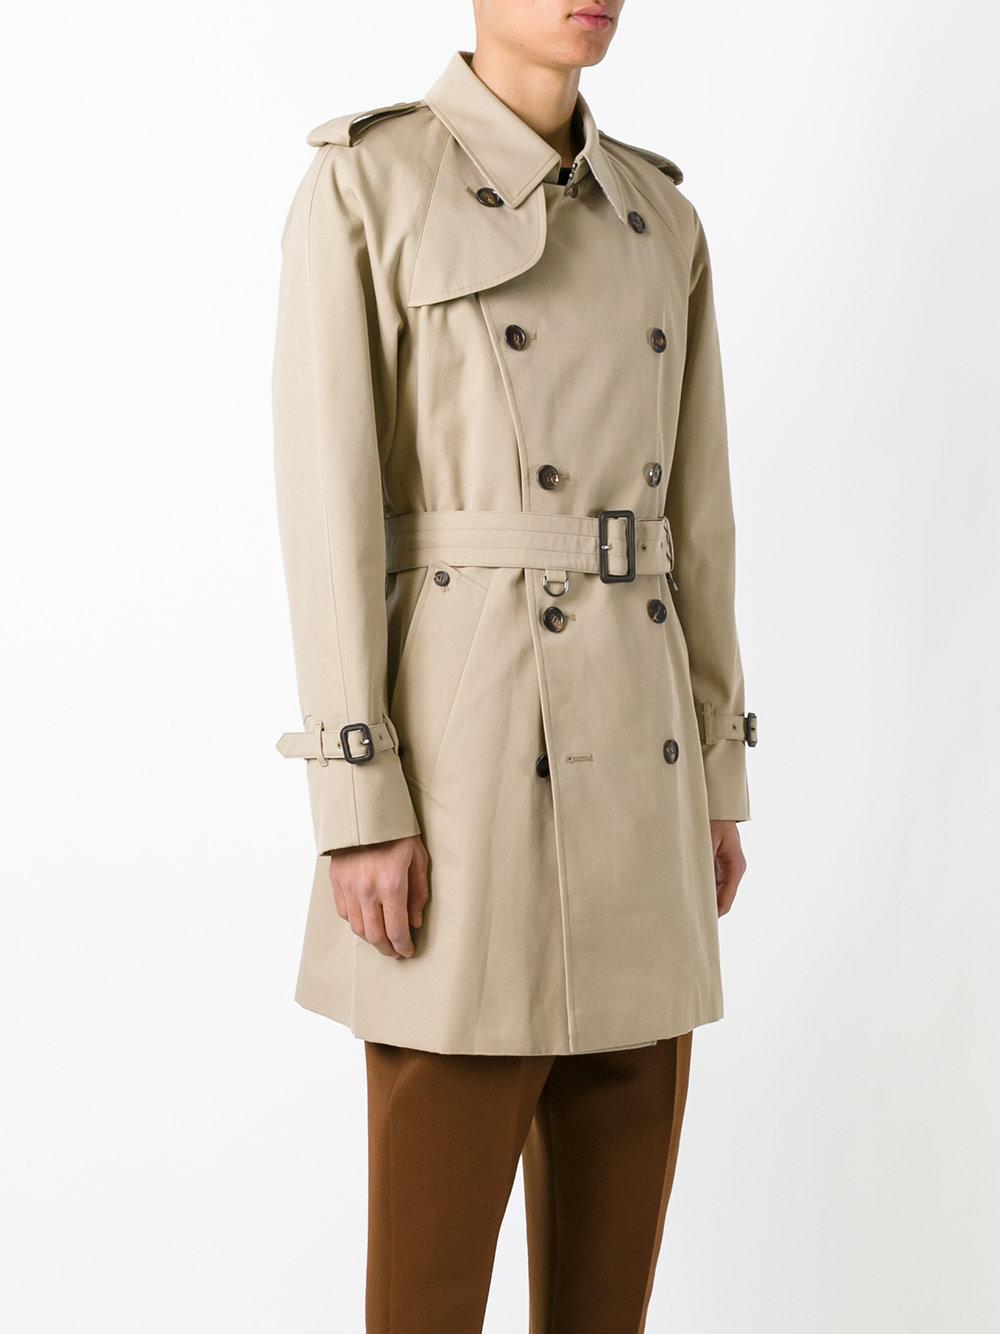 Aquascutum Cotton Double Breasted Trench Coat in Natural for Men - Lyst